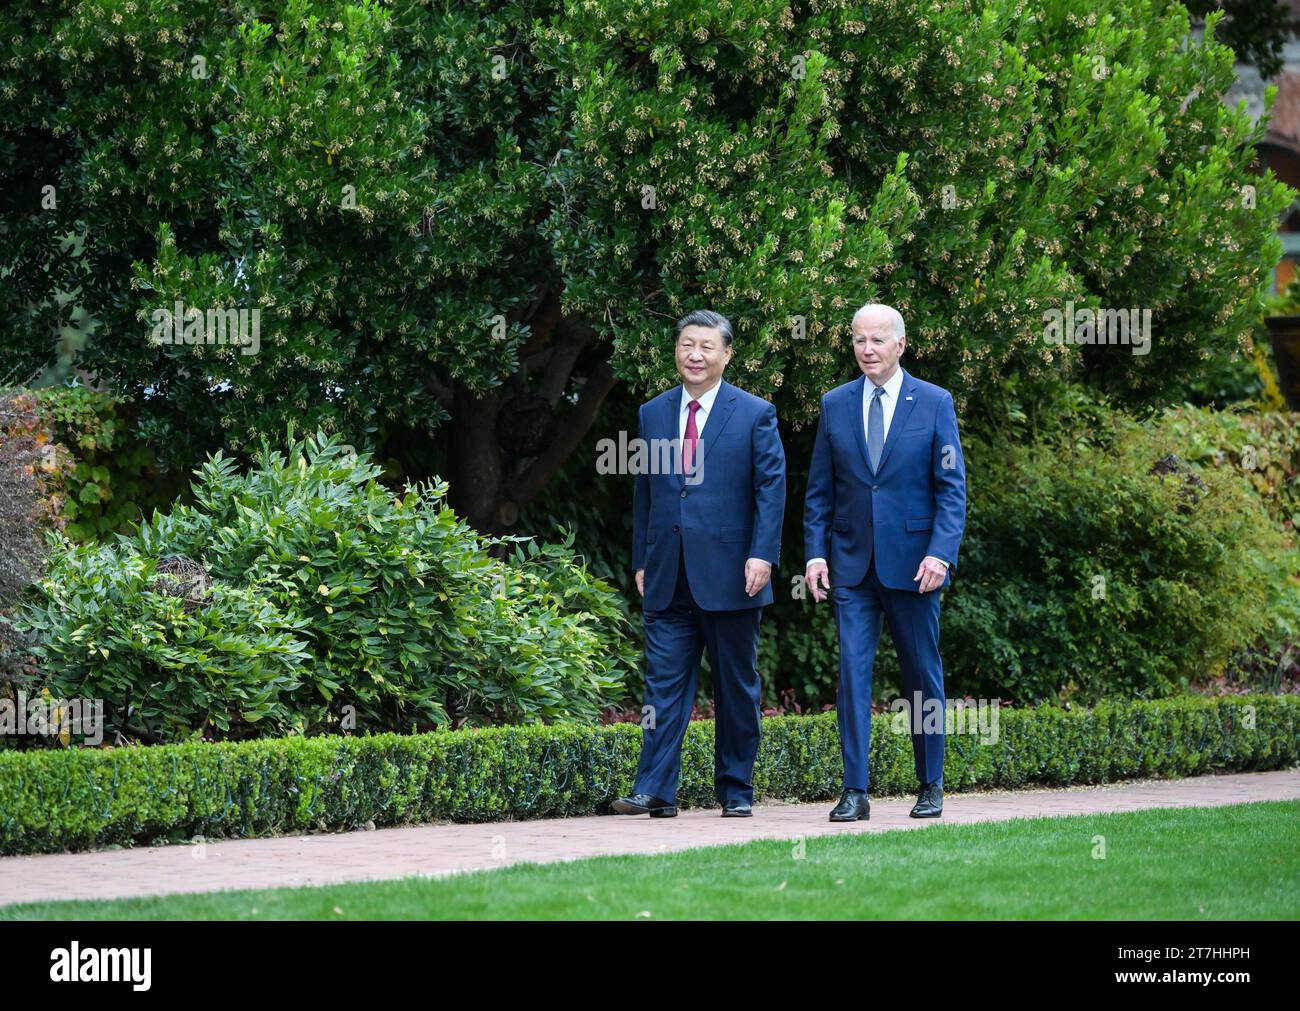 (231115) -- SAN FRANCISCO, Nov. 15, 2023 (Xinhua) -- Chinese President Xi Jinping and U.S. President Joe Biden take a walk after their talks in the Filoli Estate in the U.S. state of California, Nov. 15, 2023. Chinese President Xi Jinping and U.S. President Joe Biden on Wednesday had a candid and in-depth exchange of views on strategic and overarching issues critical to the direction of China-U.S. relations and on major issues affecting world peace and development. The meeting was held at Filoli Estate, a country house approximately 40 km south of San Francisco, California. (Xinhua/Xie Huan Stock Photo